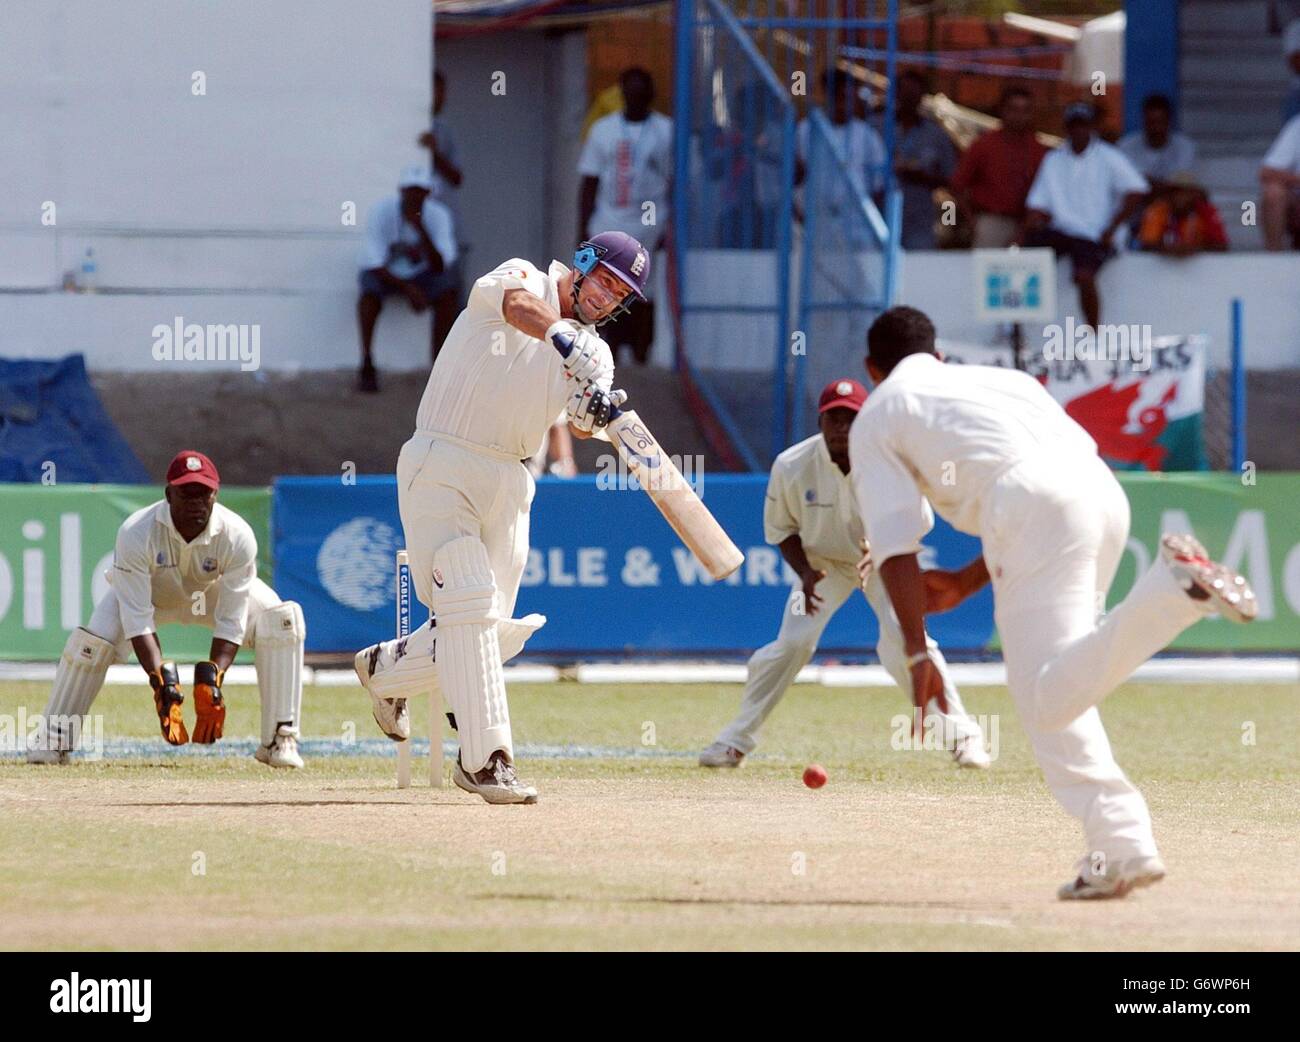 England batsman Graham Thorpe (centre) drives the ball for four runs during the fifth day of the second Test against the West Indies at the Queen's Park Oval, Port of Spain, Trinidad. England won by 7 wickets. Stock Photo